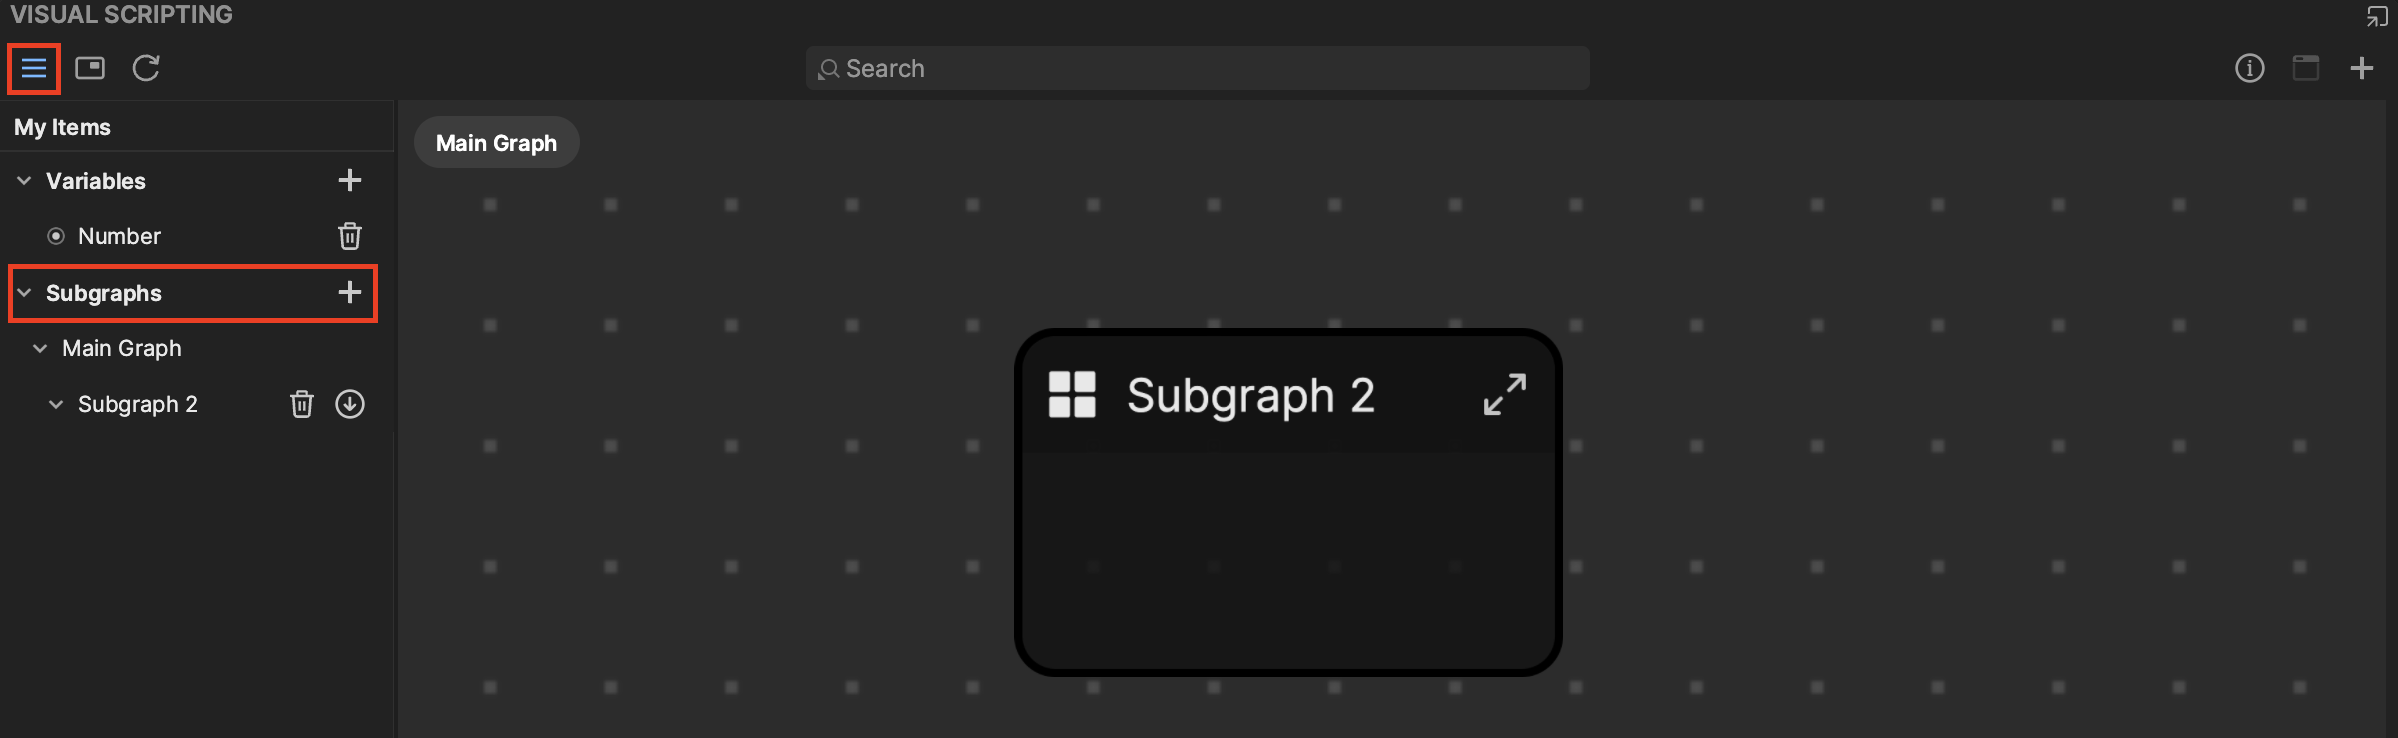 subgraphs in my items